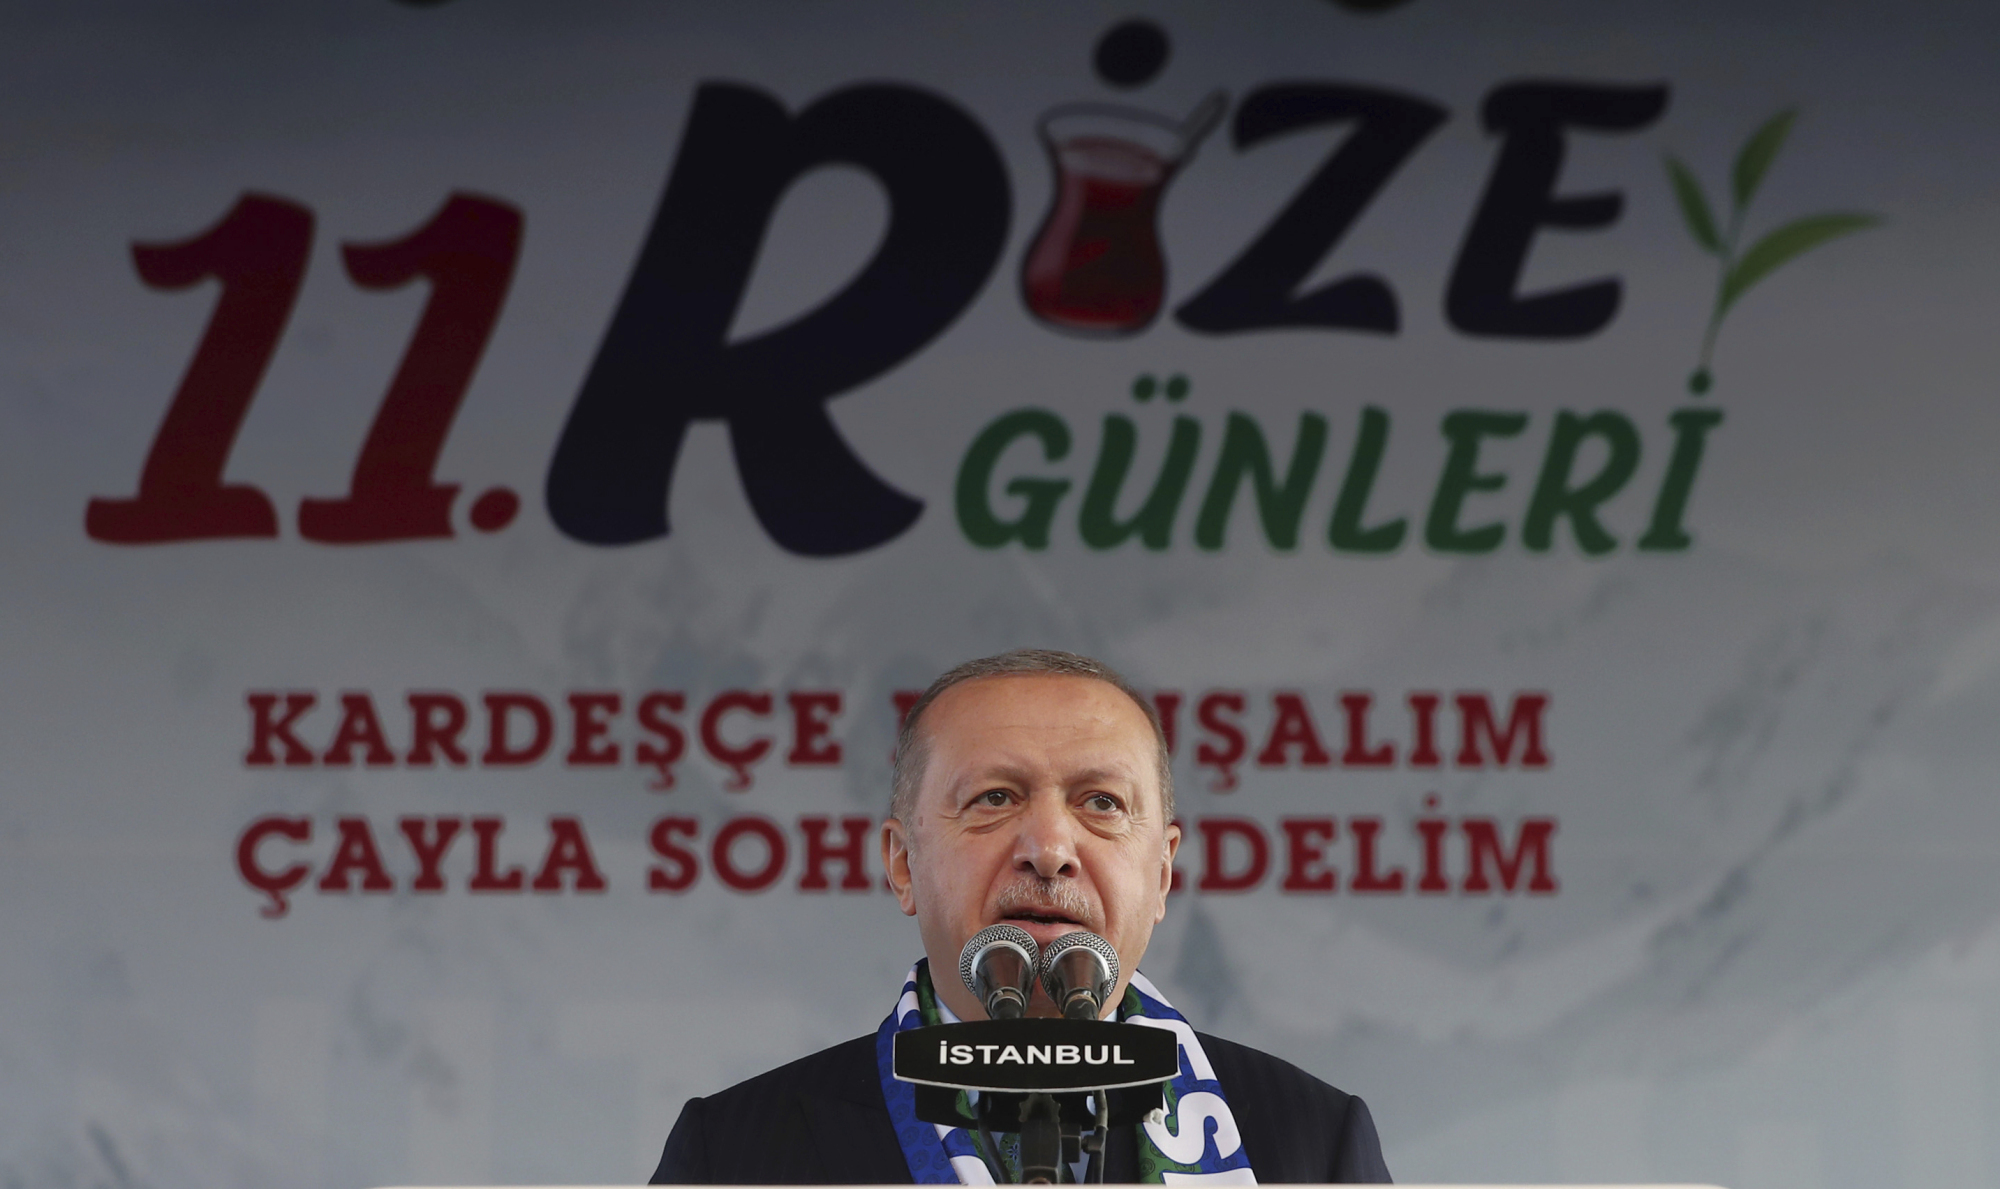 Turkish President Recep Tayyip Erdogan addresses his supporters during an event called 'Let's stop smoking, let's drink Rize tea ' in his Black Sea hometown, Rize, Turkey, Sunday. | PRESIDENTIAL PRESS SERVICE / VIA AP